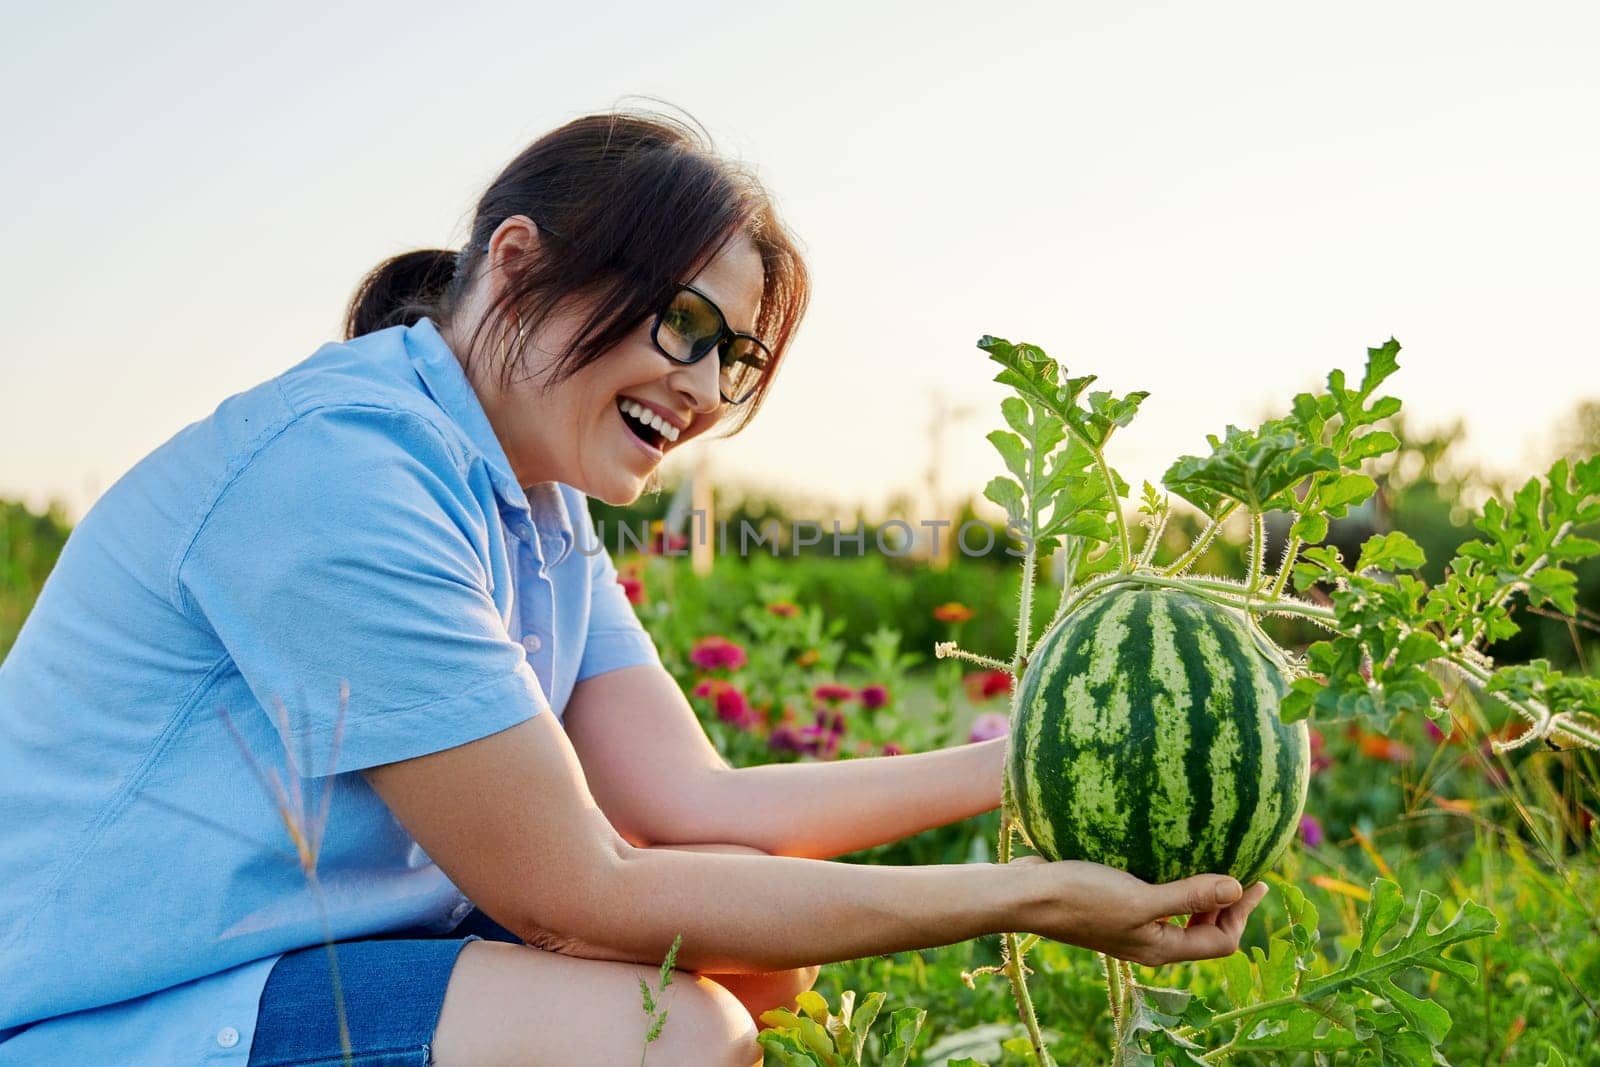 Woman gardener with watermelon berry in her hands, on watermelon garden. Happy female rejoicing in harvest, natural organic food, gardening, agriculture, summer autumn season, hobby, farming concept